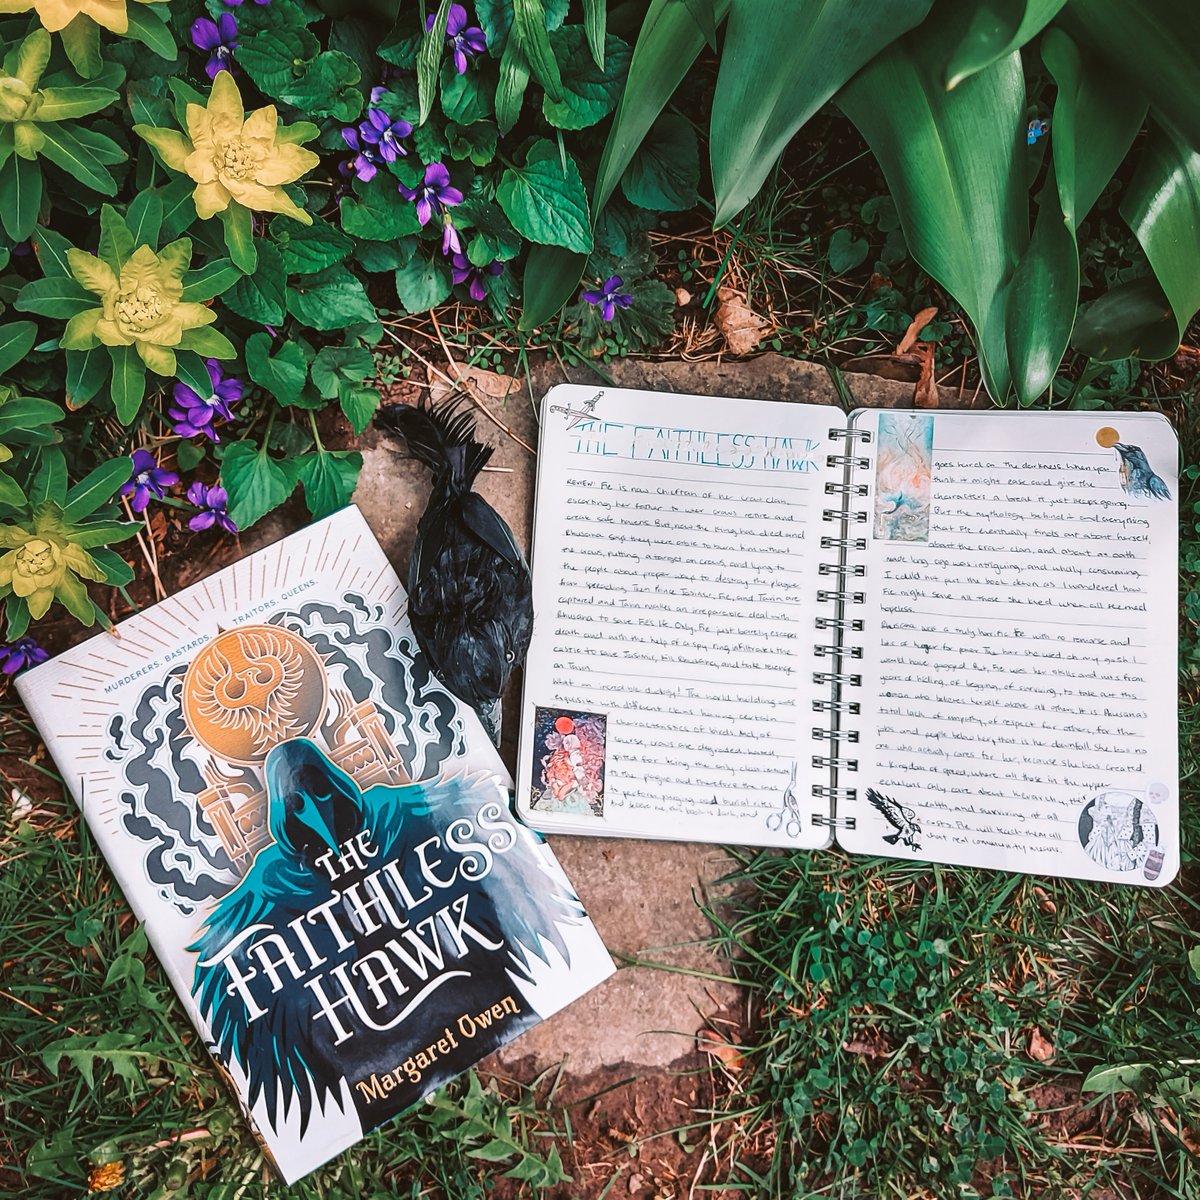 New #BookReview. A fabulous ending to a new favourite duology. I highly recommend #TheFaithlessHawk by #MargaretOwen

onemamassummer.weebly.com/book-reviews/t…

#OneMamaReads #BookBlog #FantasyDuology #YoungAdult #FantasyReads #SavvyReader #50BookPledge #HenryHolt #Macmillan #Audiobook